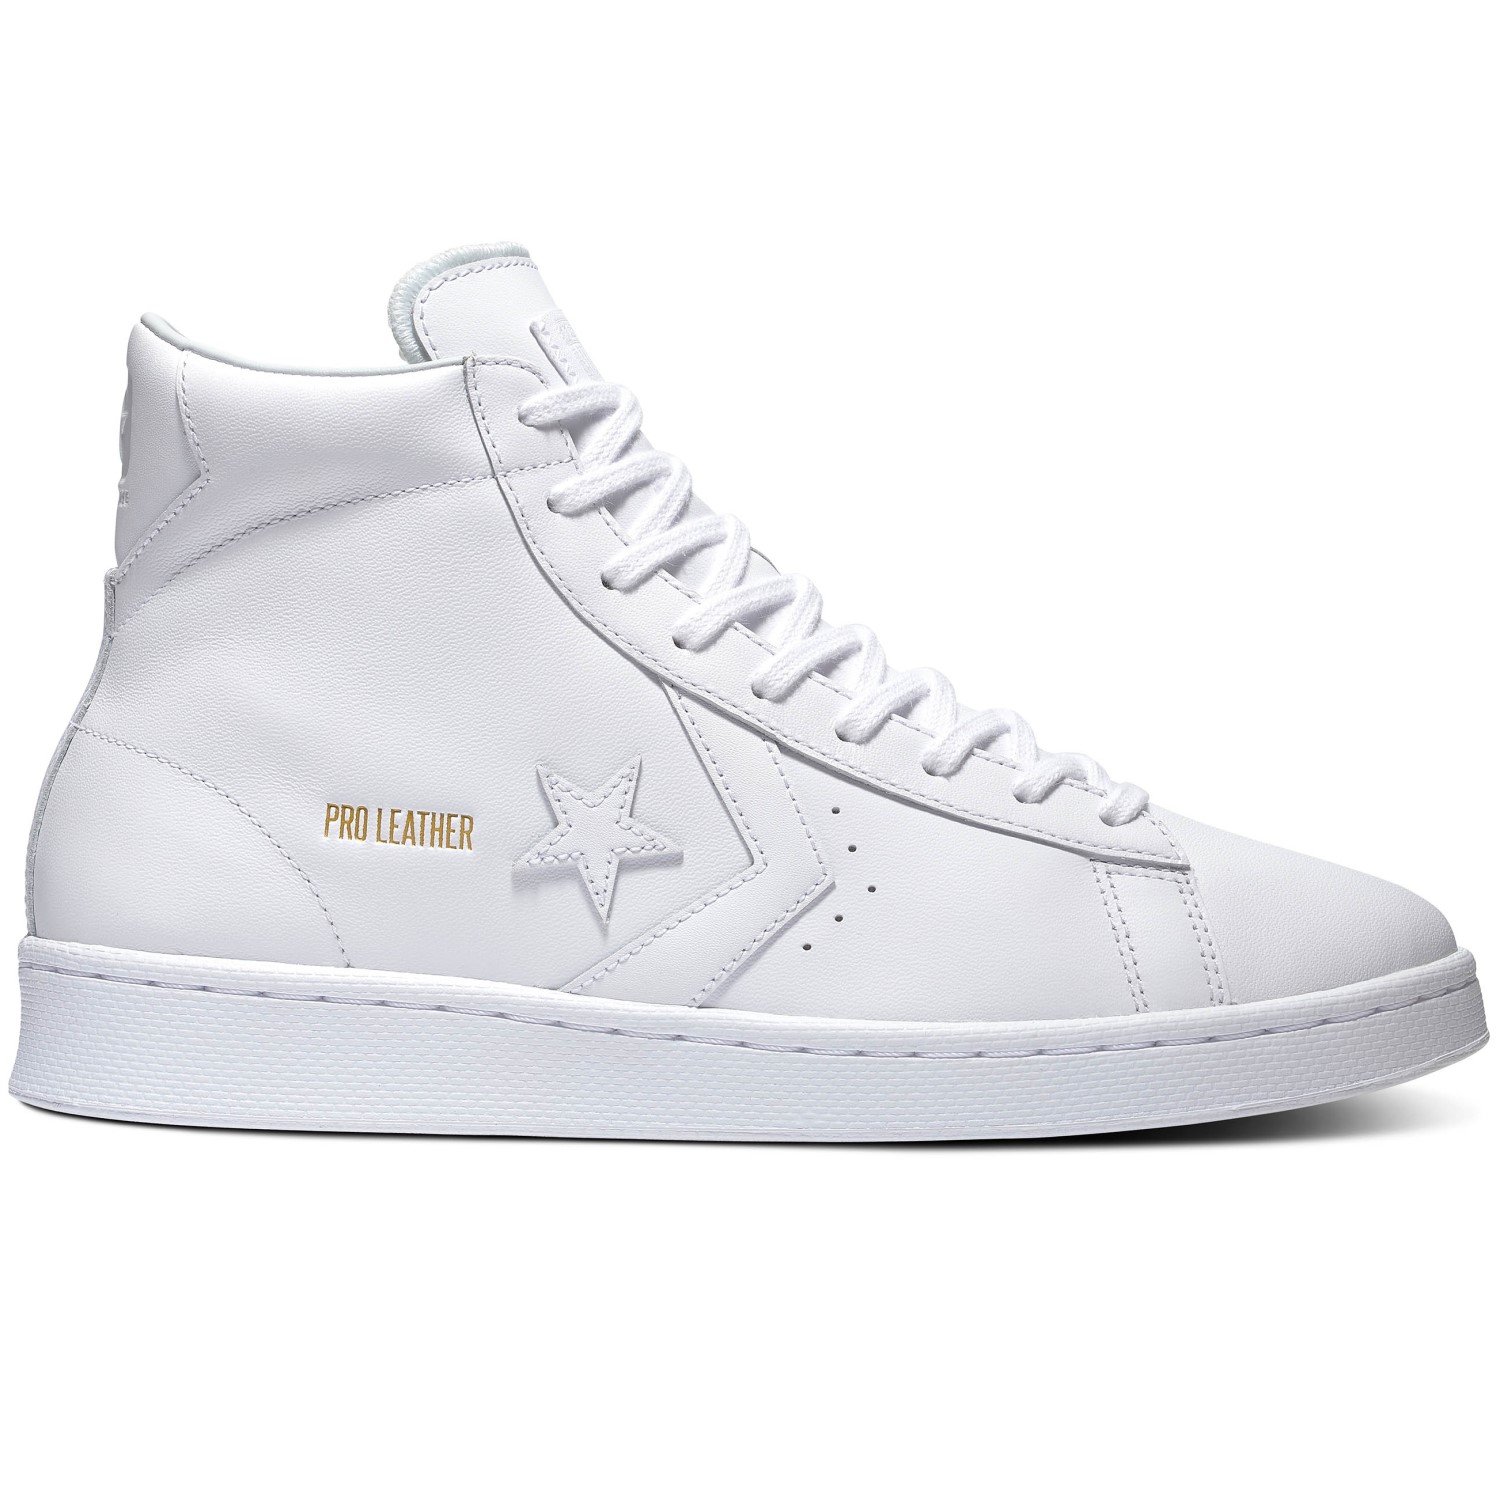 Converse Pro Leather Mid Sneaker